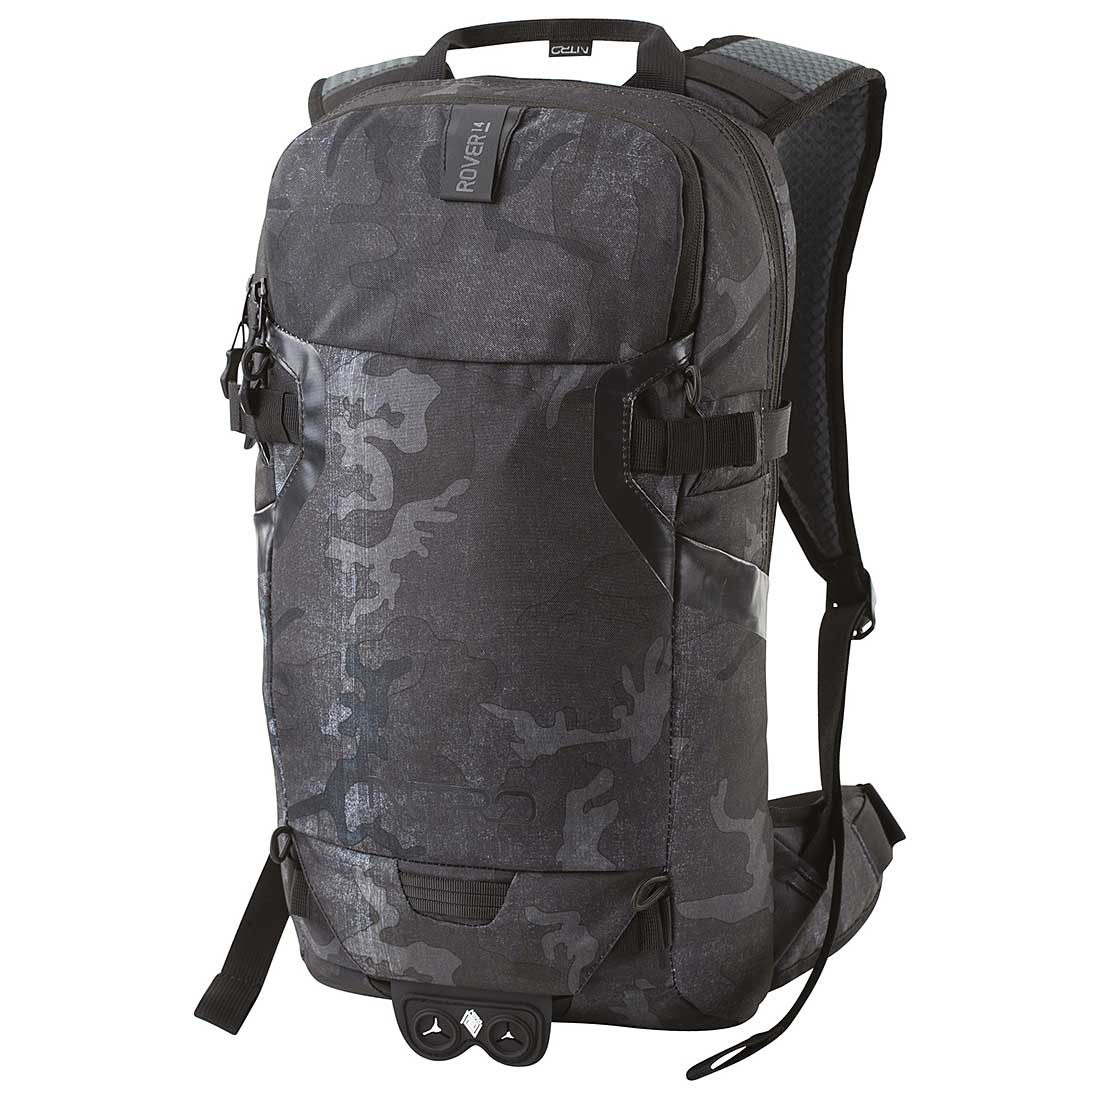 14 Camo Backpack Rover Forged Nitro